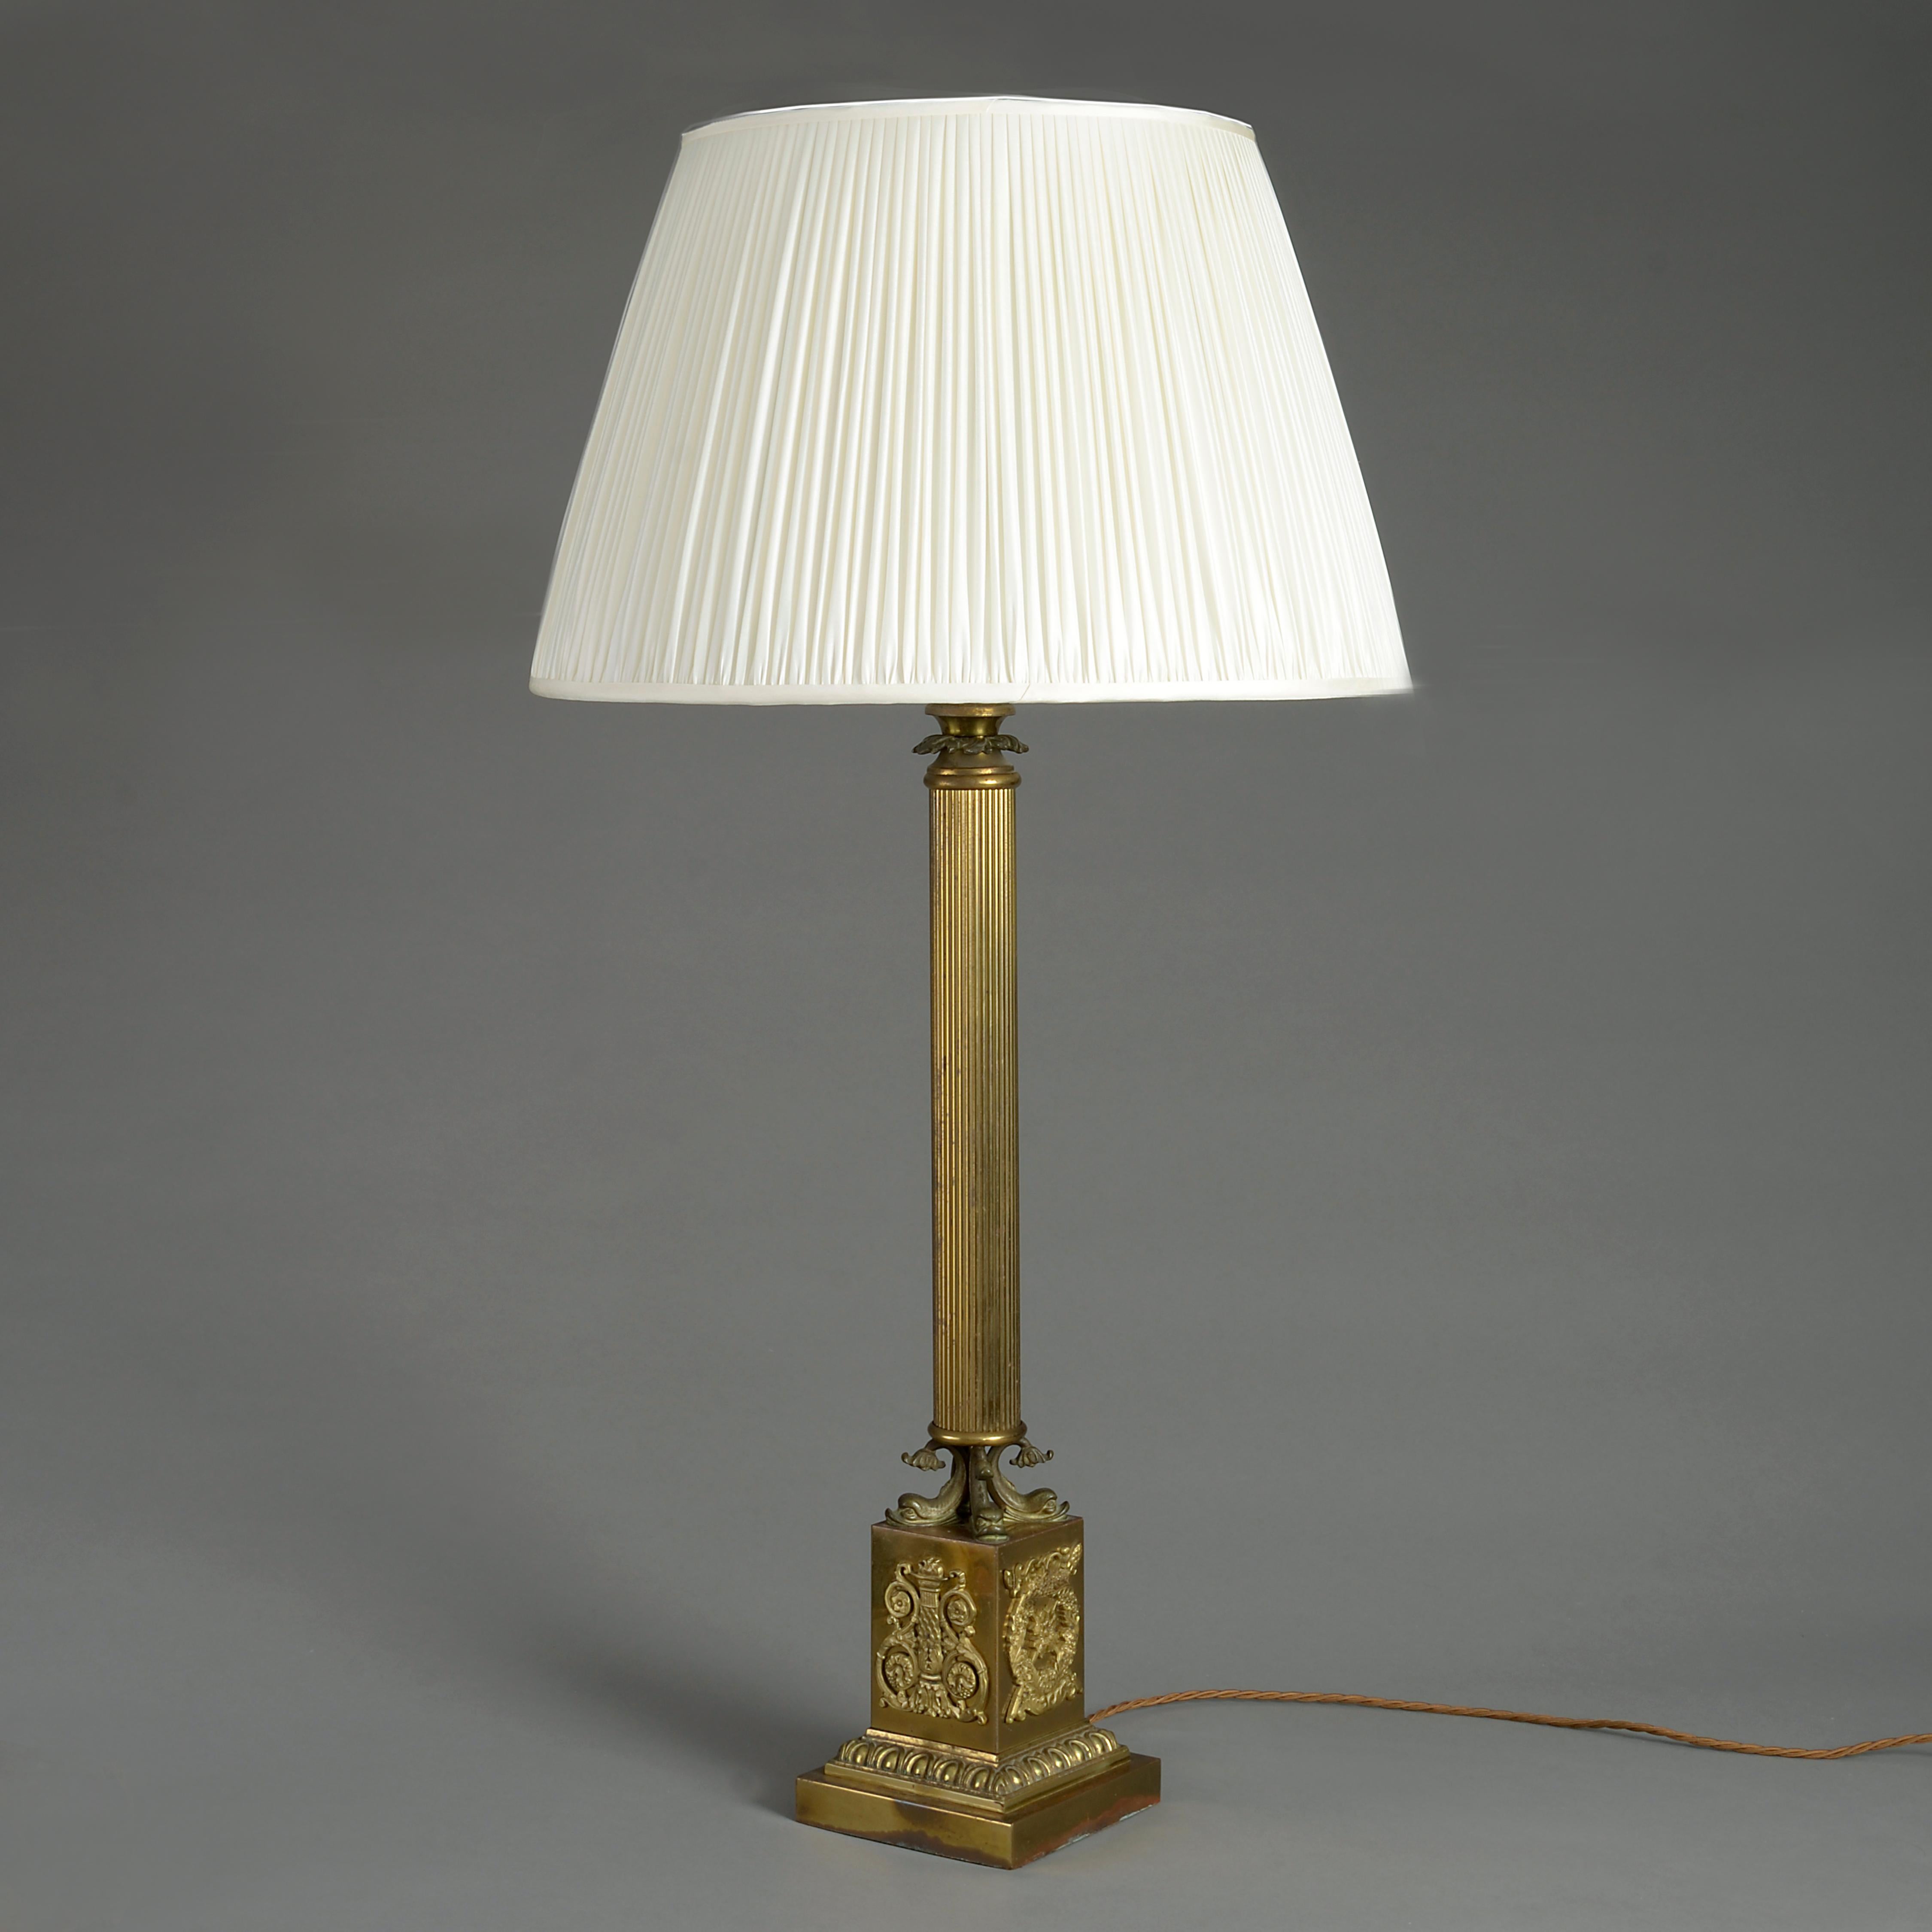 An early 19th century Empire Period gilt brass column lamp, the fluted column set upon a plinth with stylised dolphin supports.